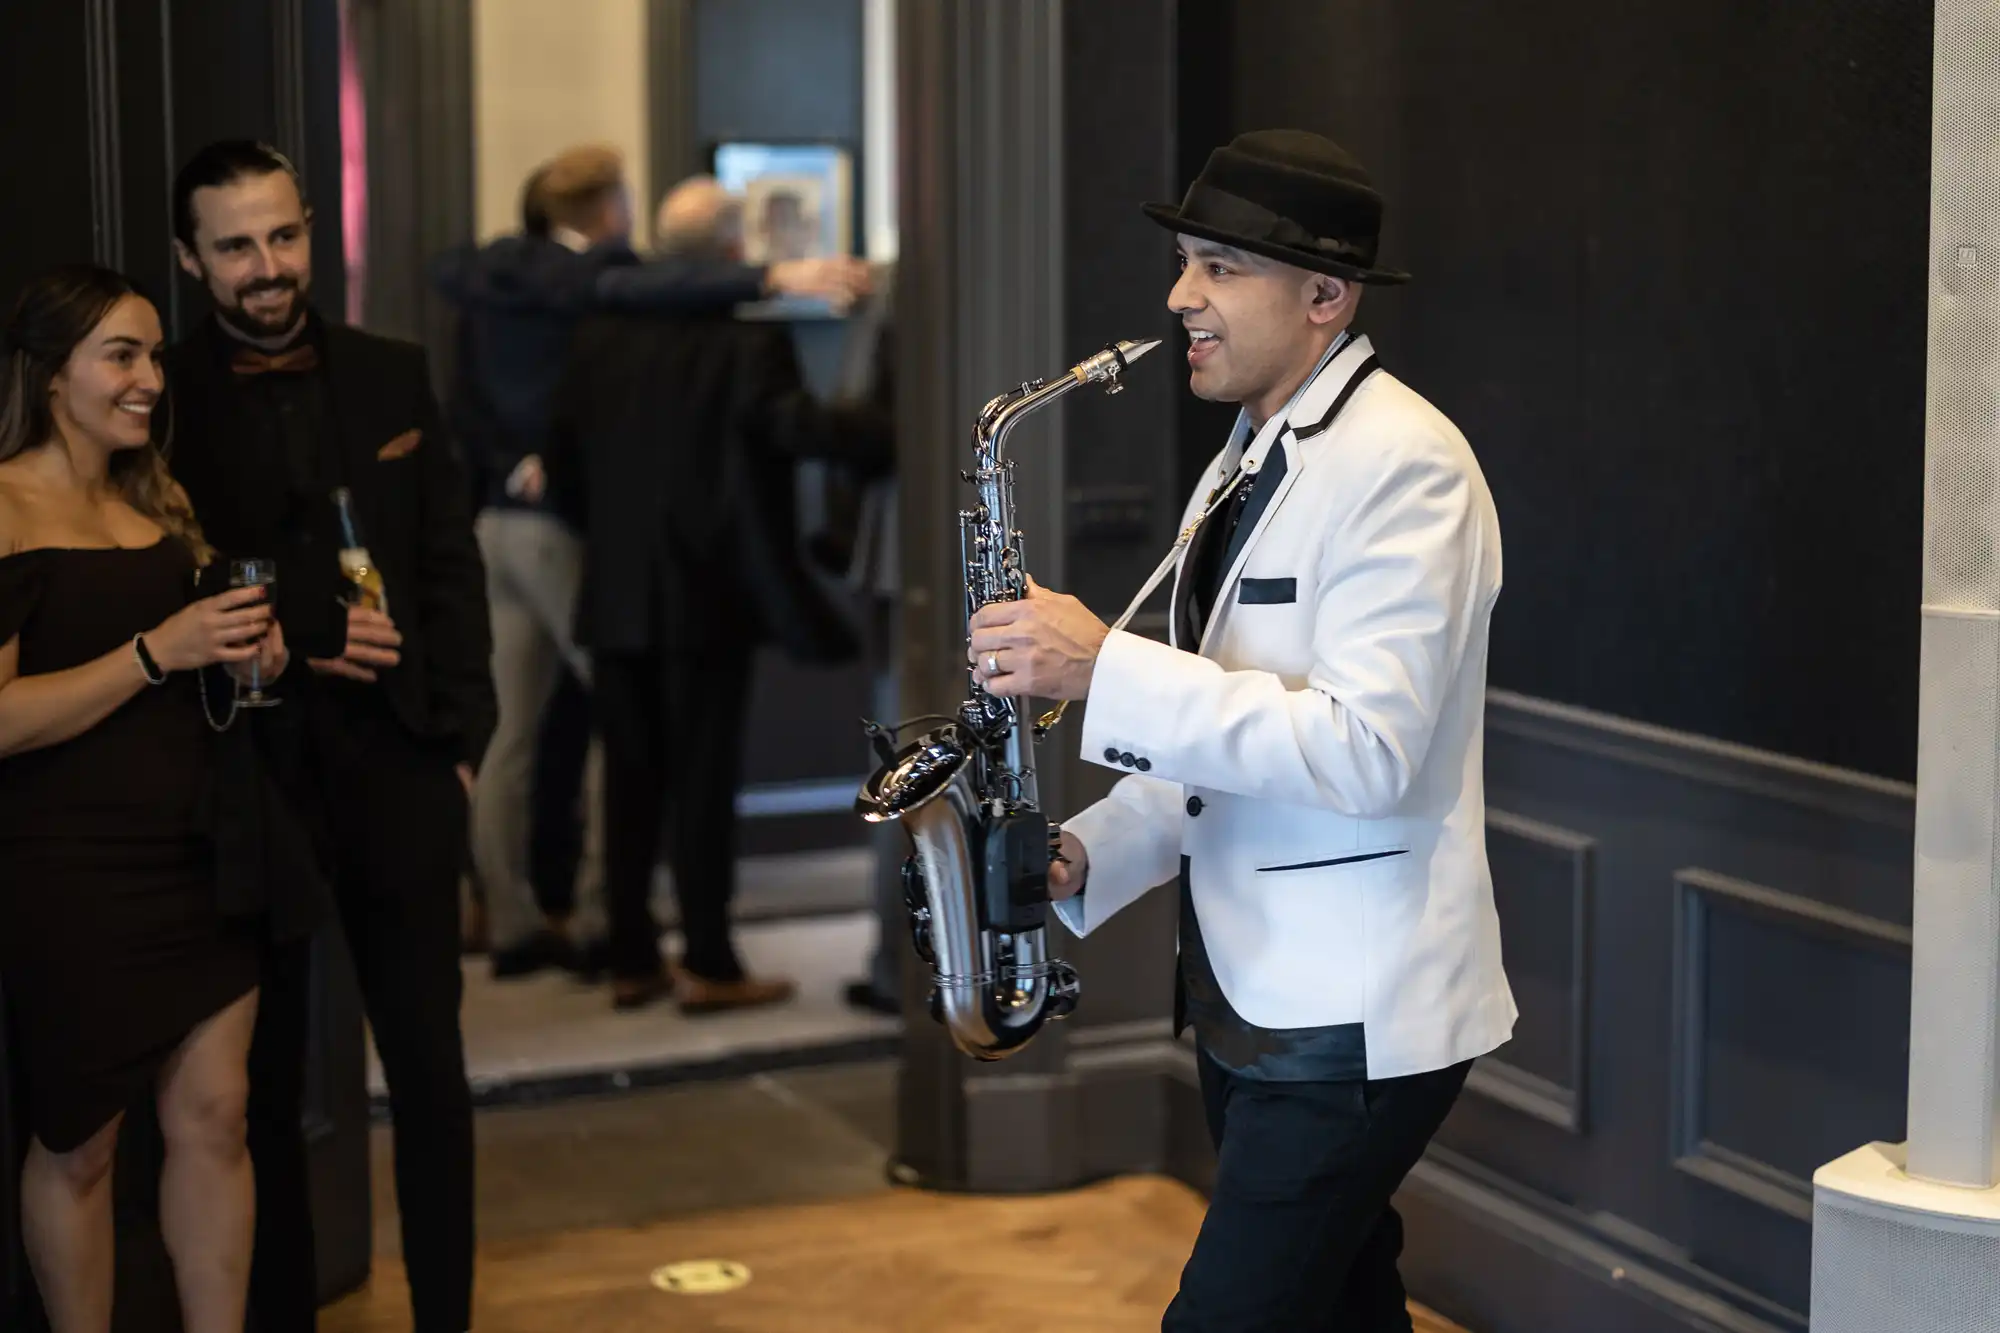 A saxophonist in a white suit and black hat plays his instrument while guests look on at an indoor event.